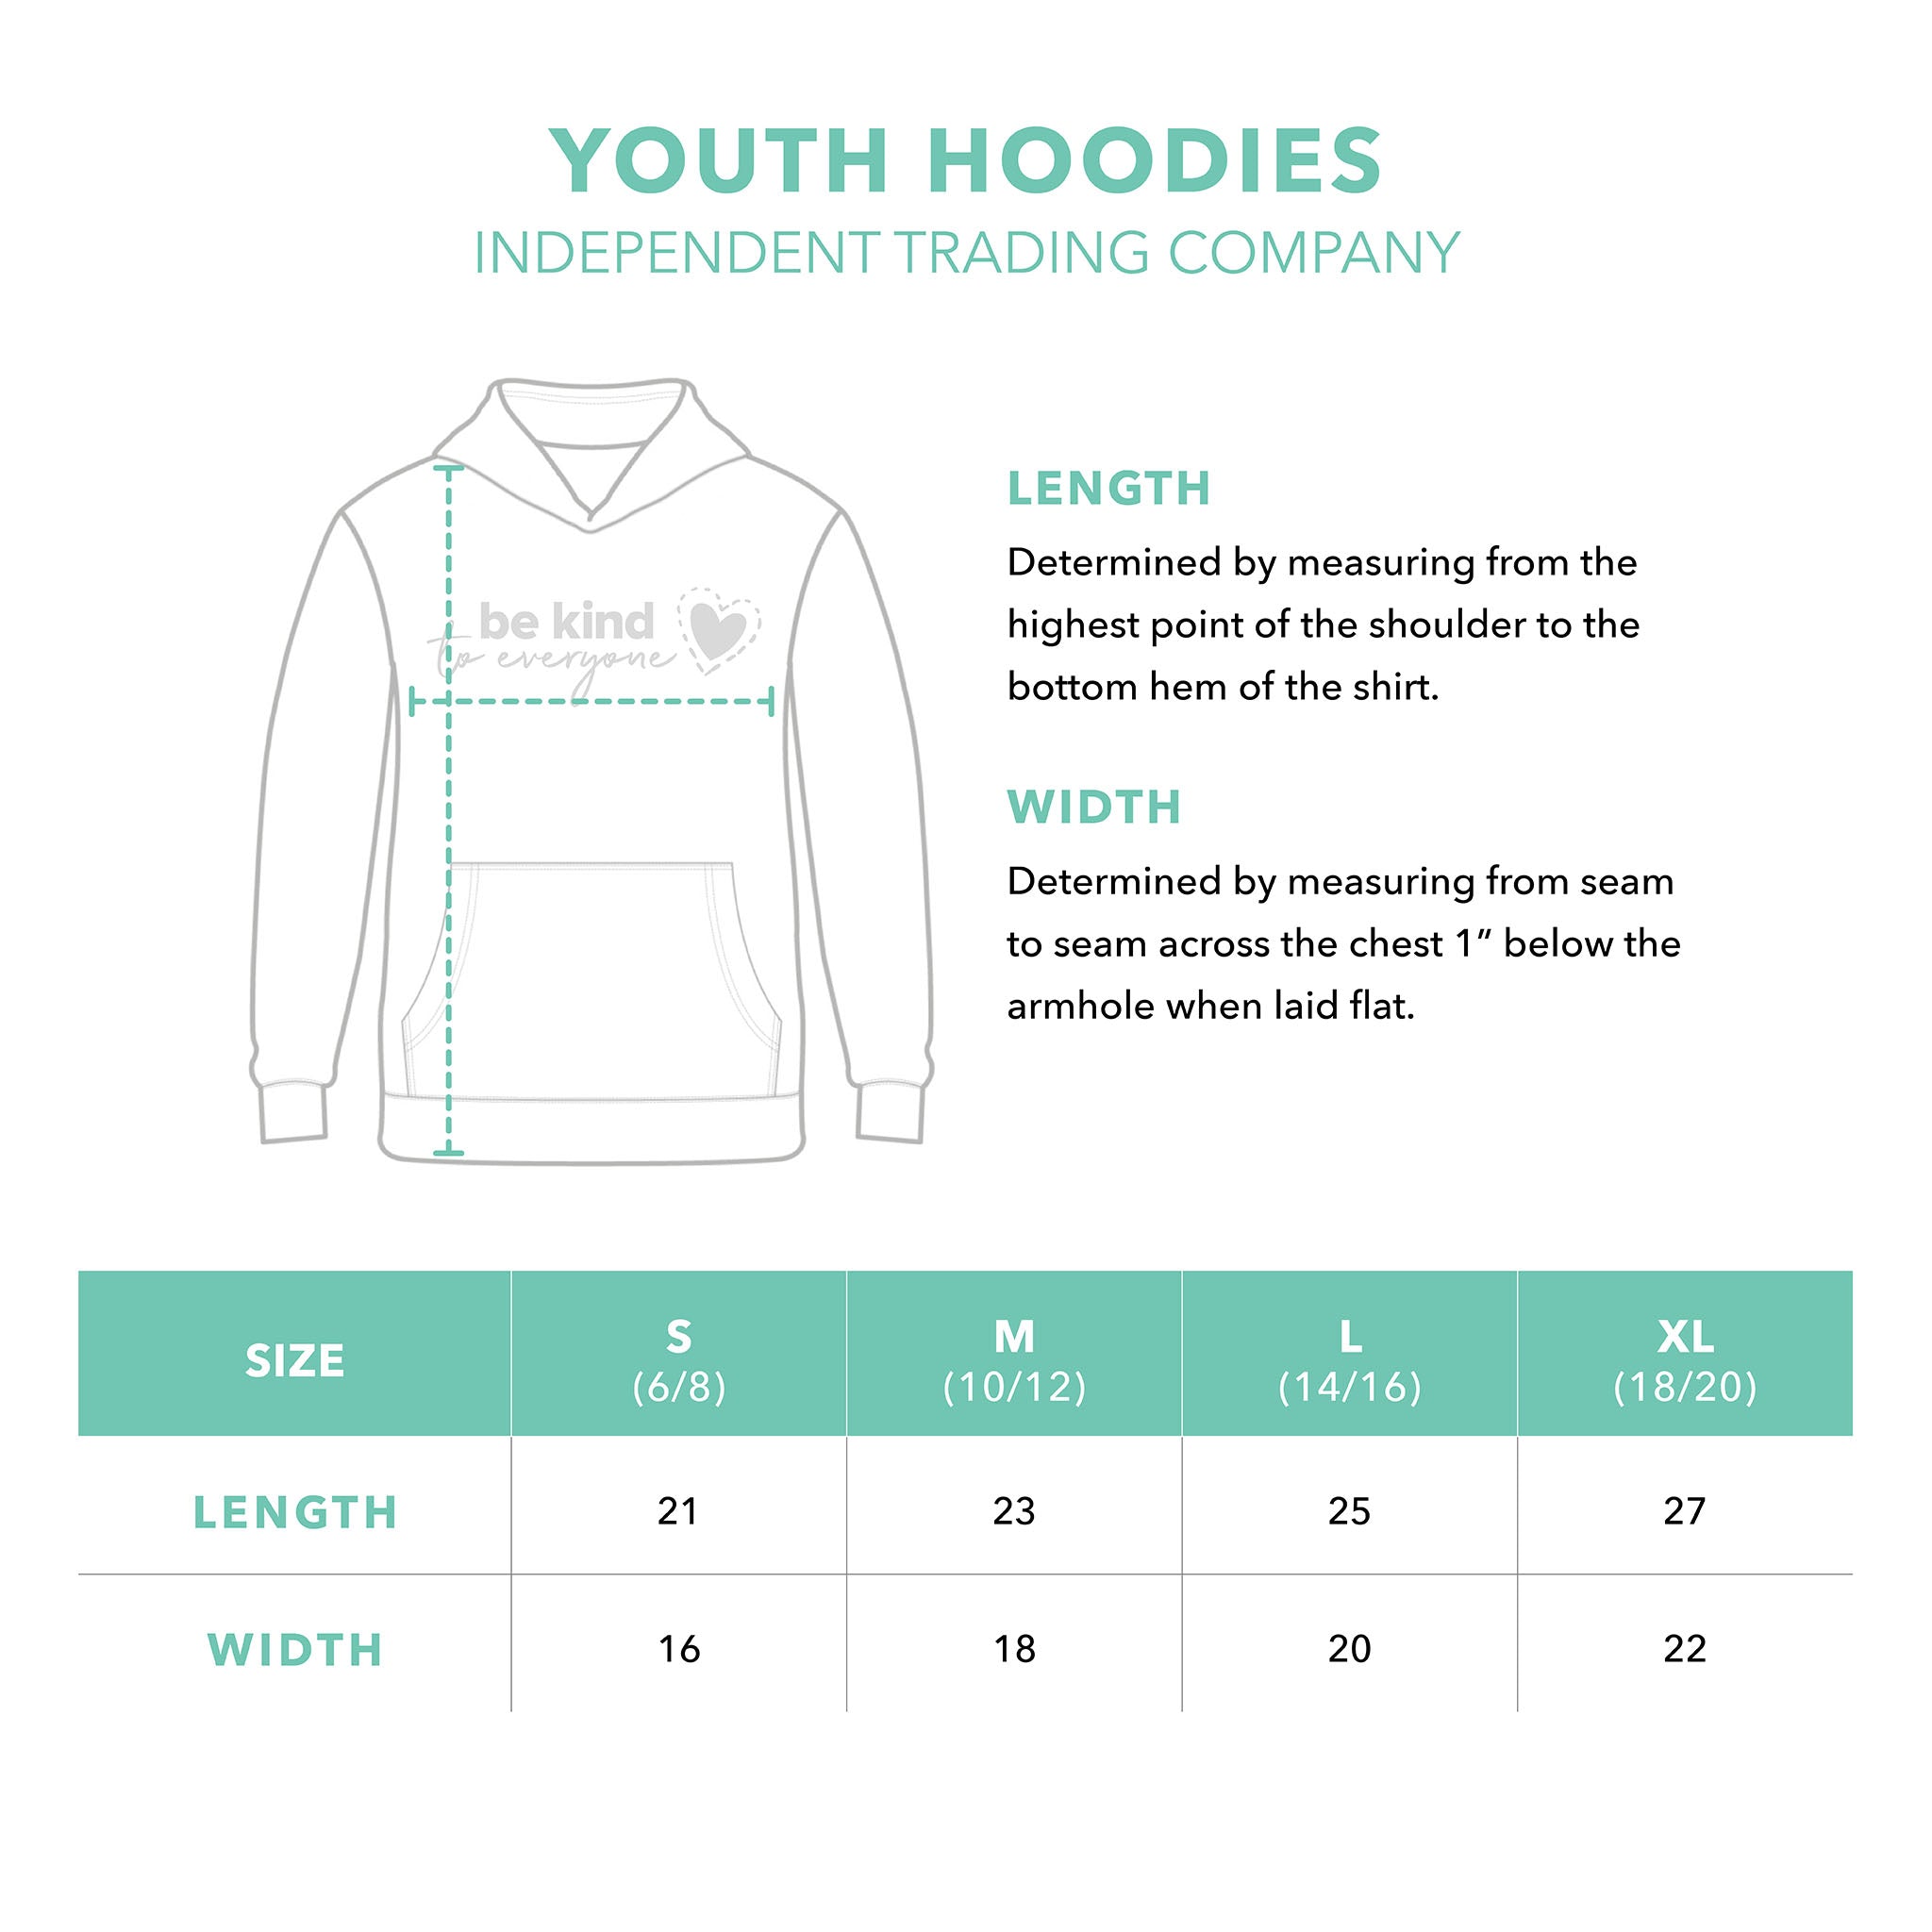 Youth Hoodie Sizing Guide